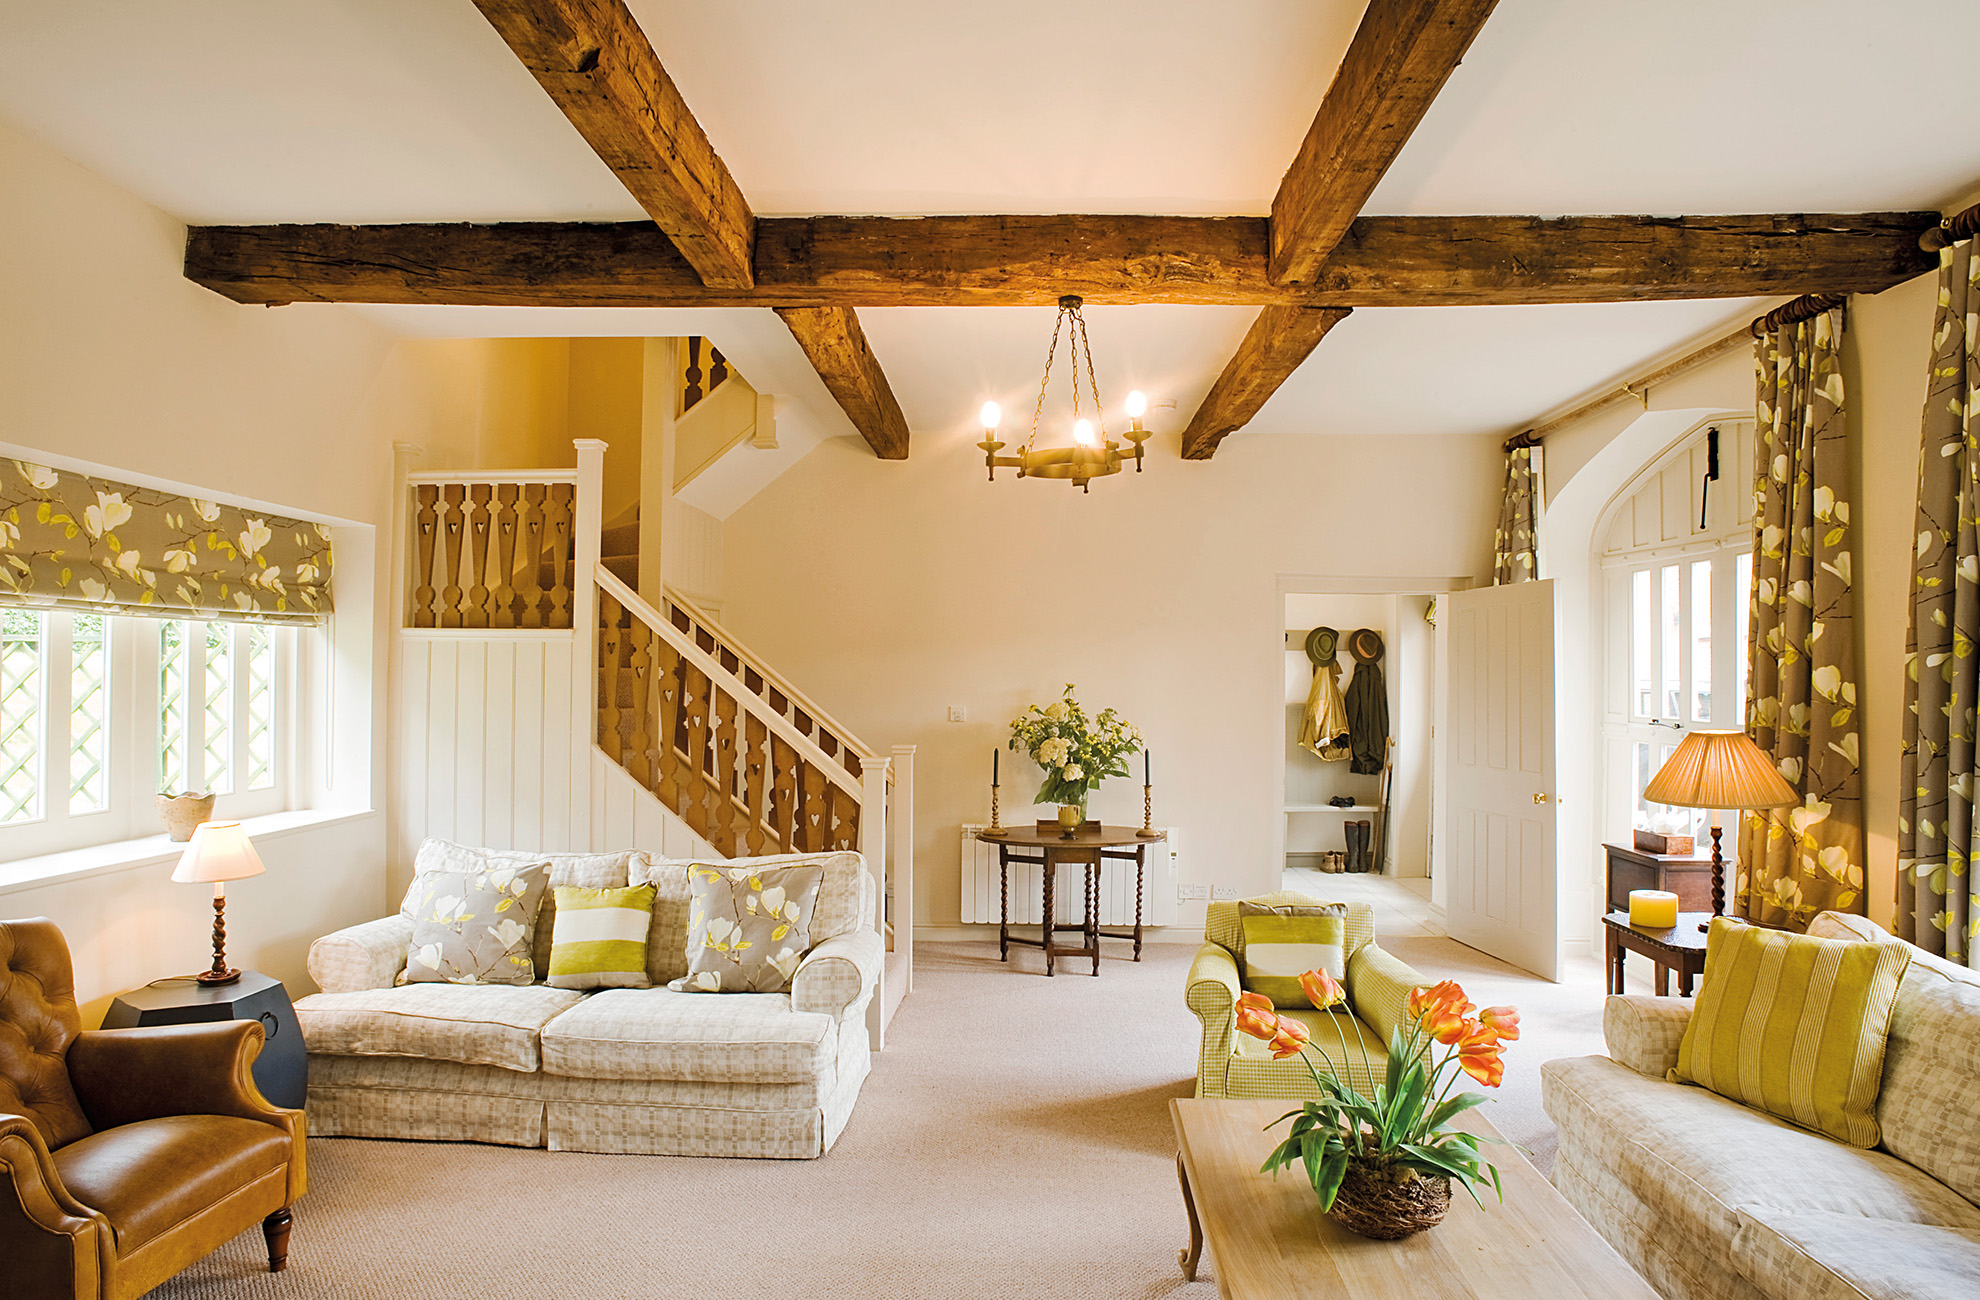 The Malbanc Cottage self-catering accommodation at Combermere Abbey